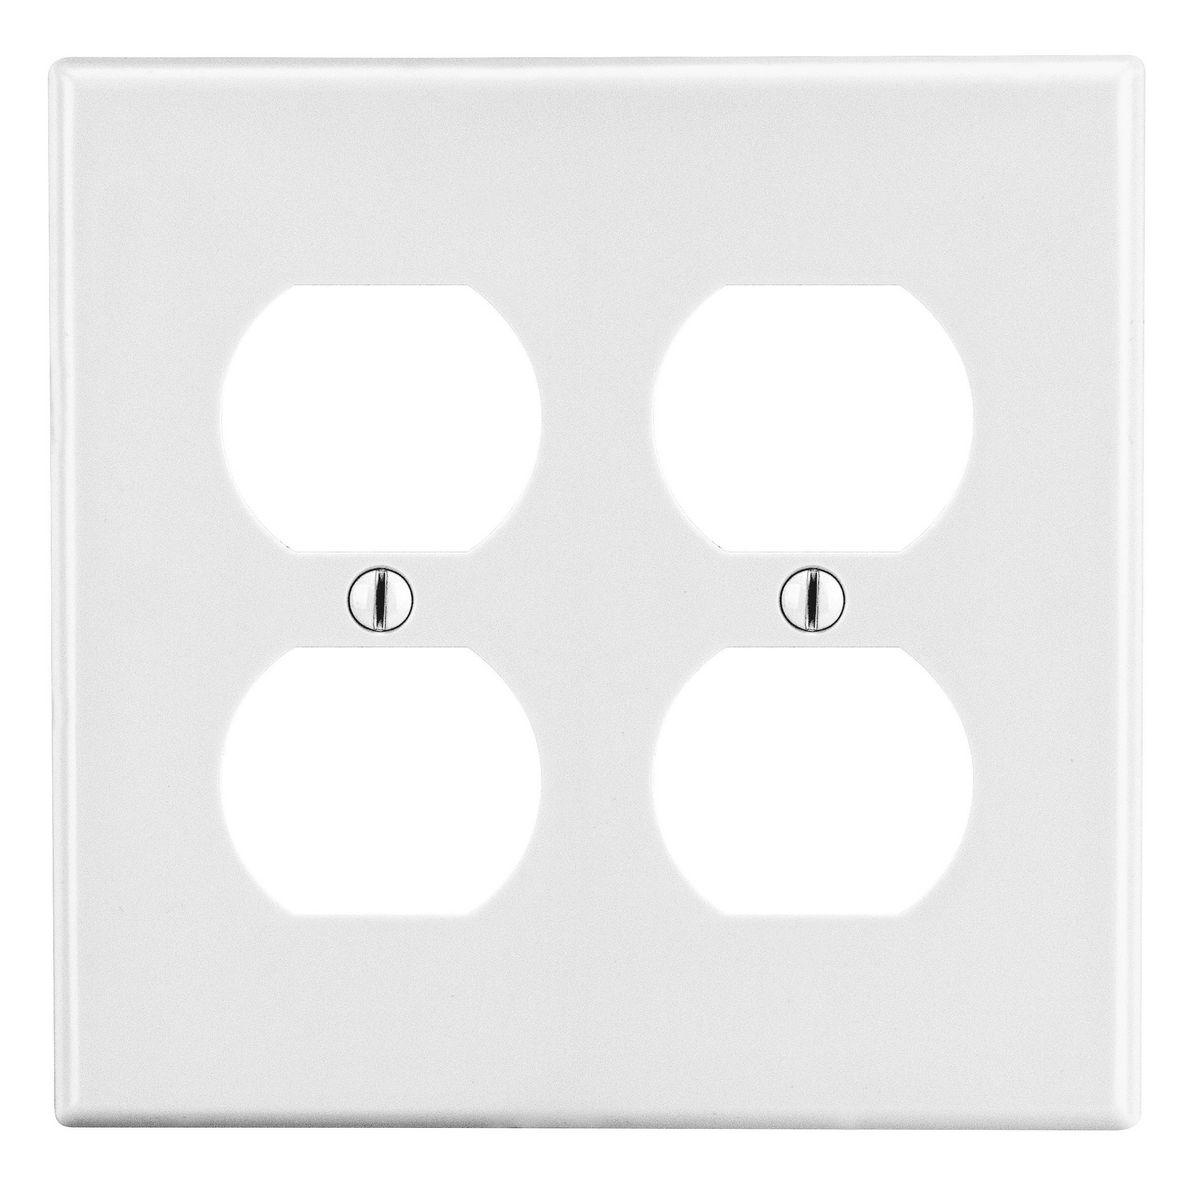 Hubbell PJ82W Wallplate, Mid-Size 2-Gang, 2) Duplex, White  ; High-impact, self-extinguishing polycarbonate material ; More Rigid ; Sharp lines and less dimpling ; Smooth satin finish ; Blends into wall with an optimum finish ; Smooth Satin Finish